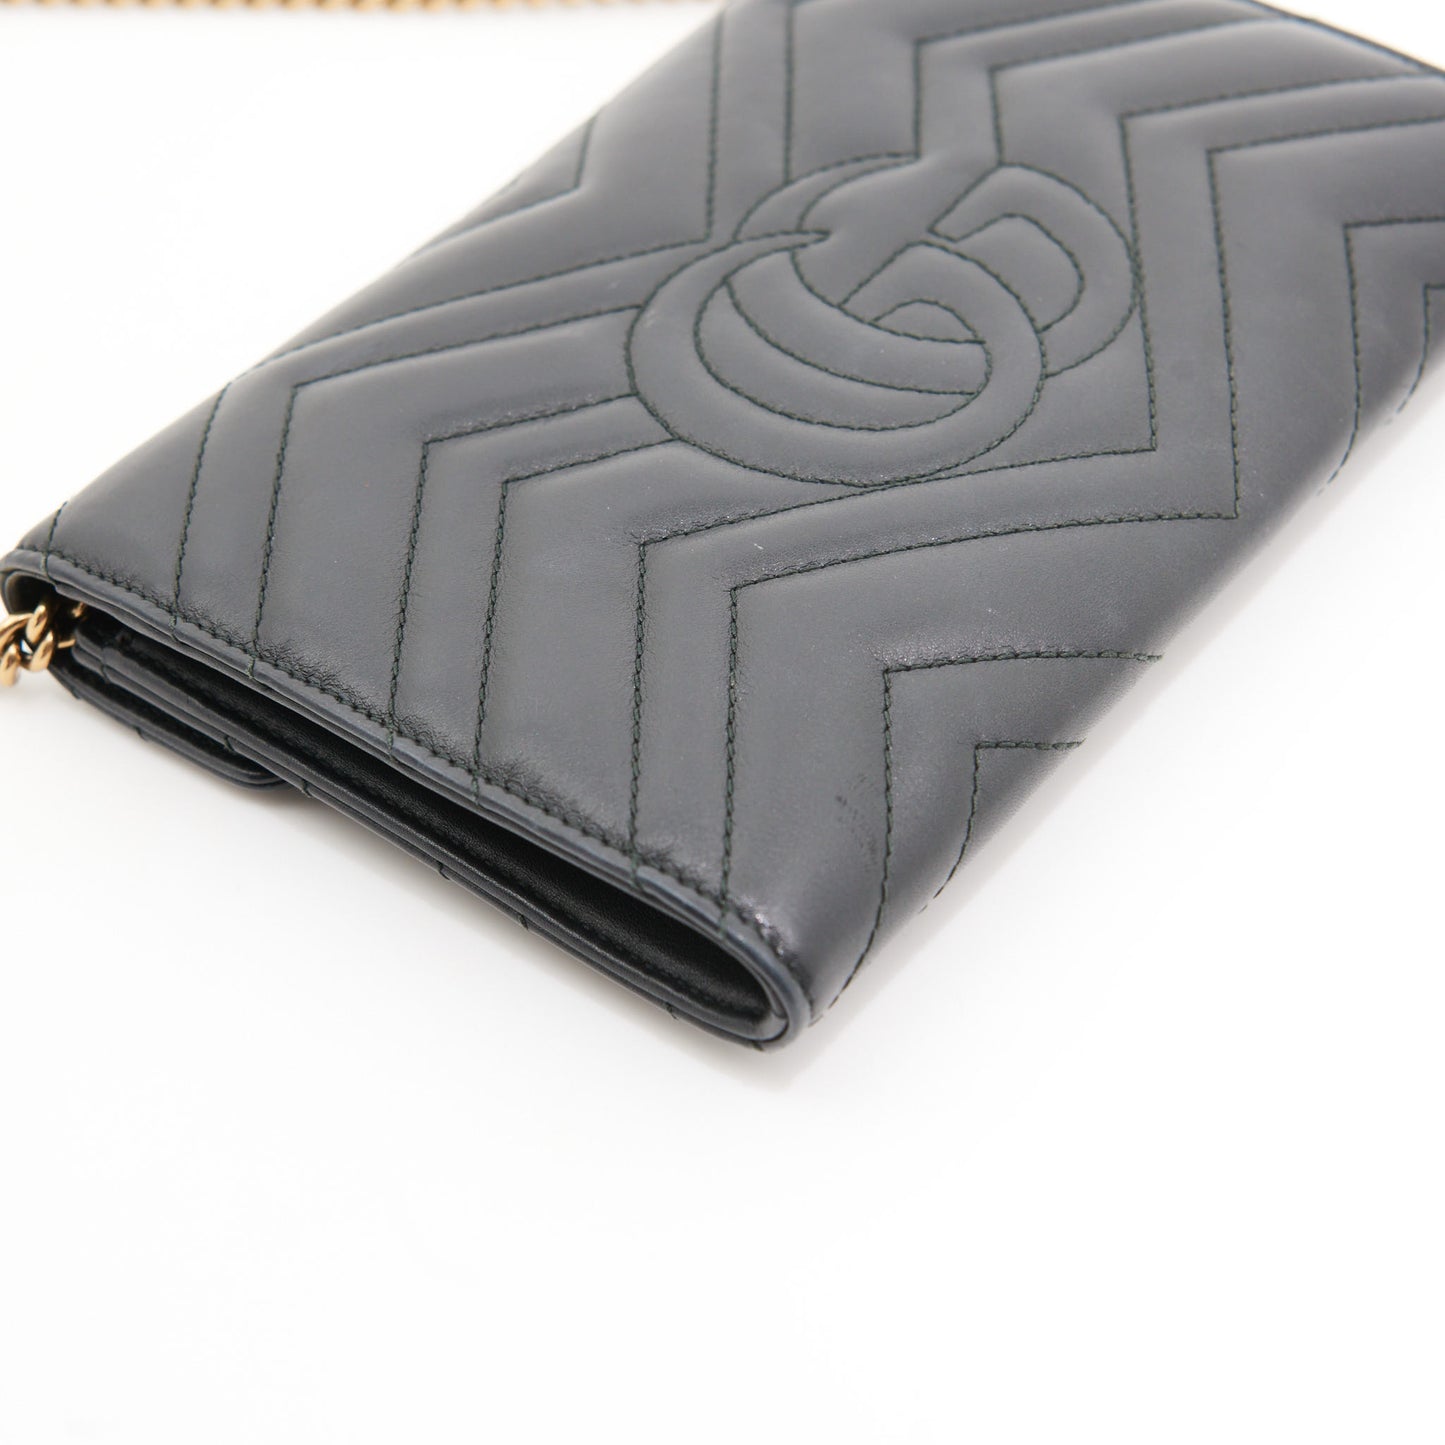 Gucci Marmont Black Wallet on Chain Bag